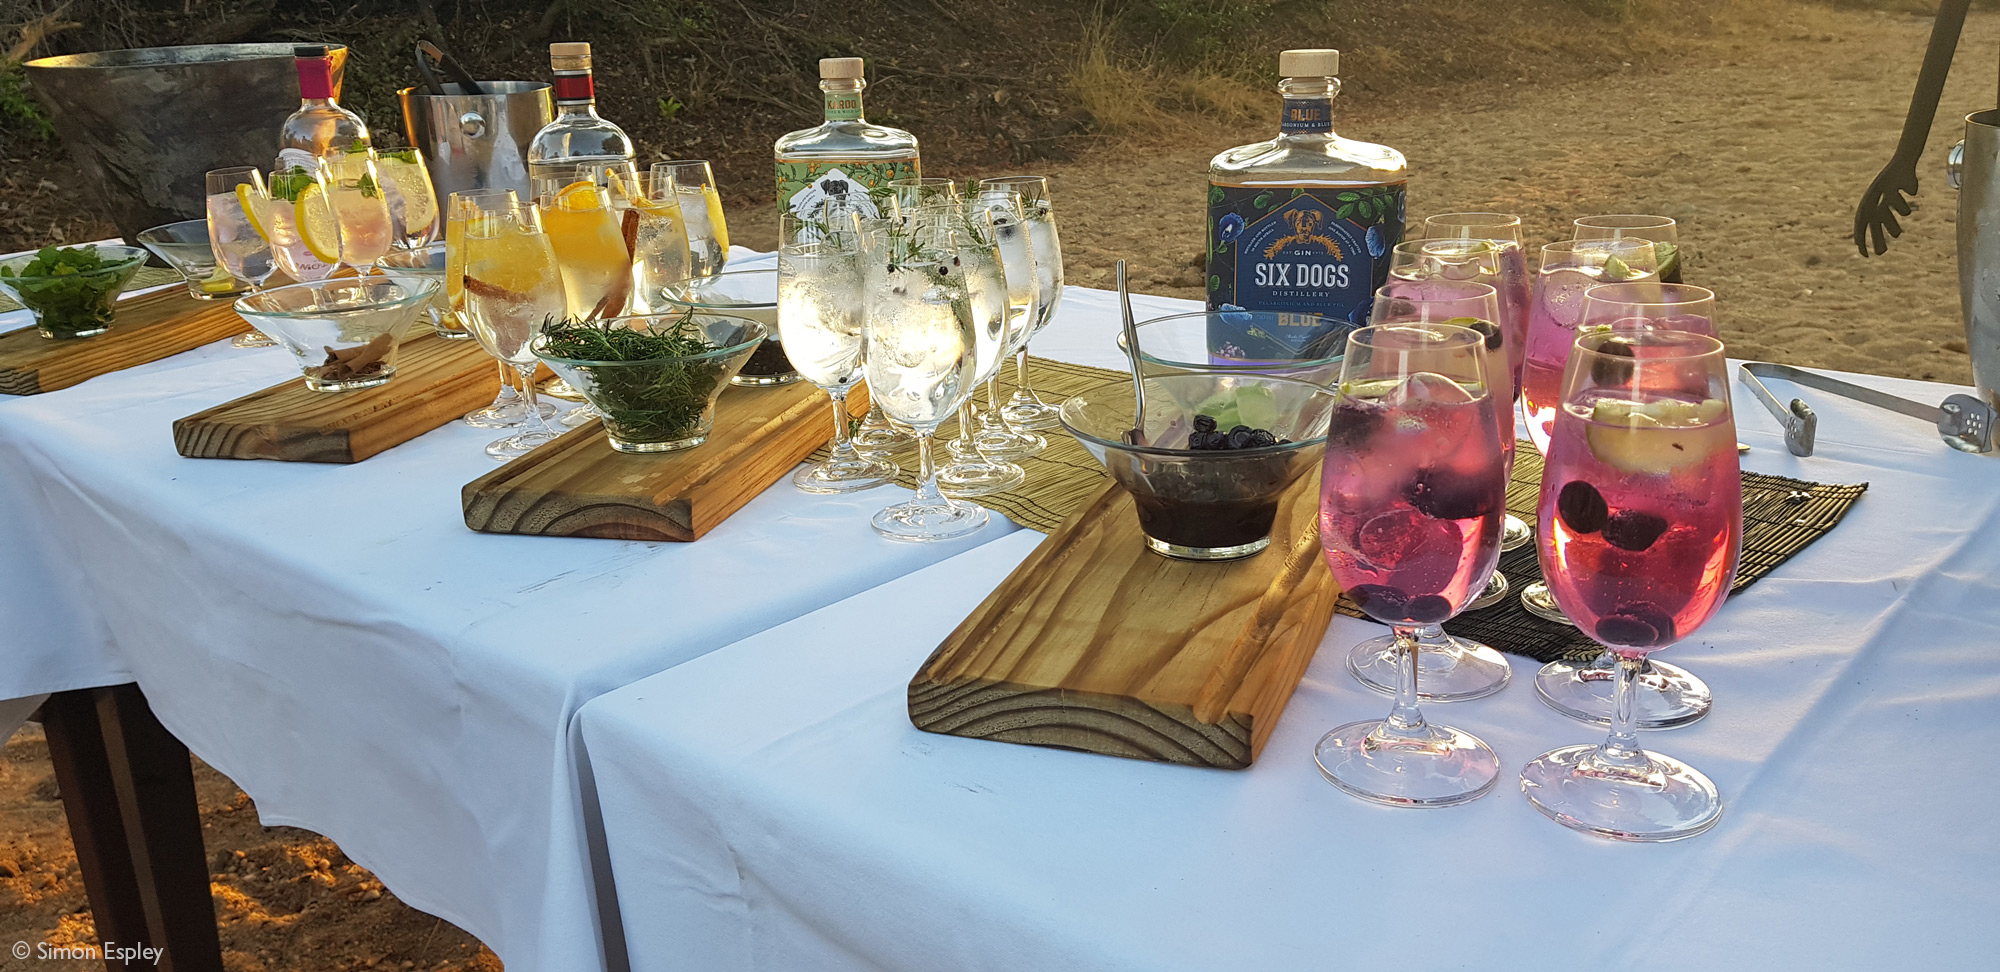 Selection of gin and tonics, Klaserie Private Nature Reserve, South Africa